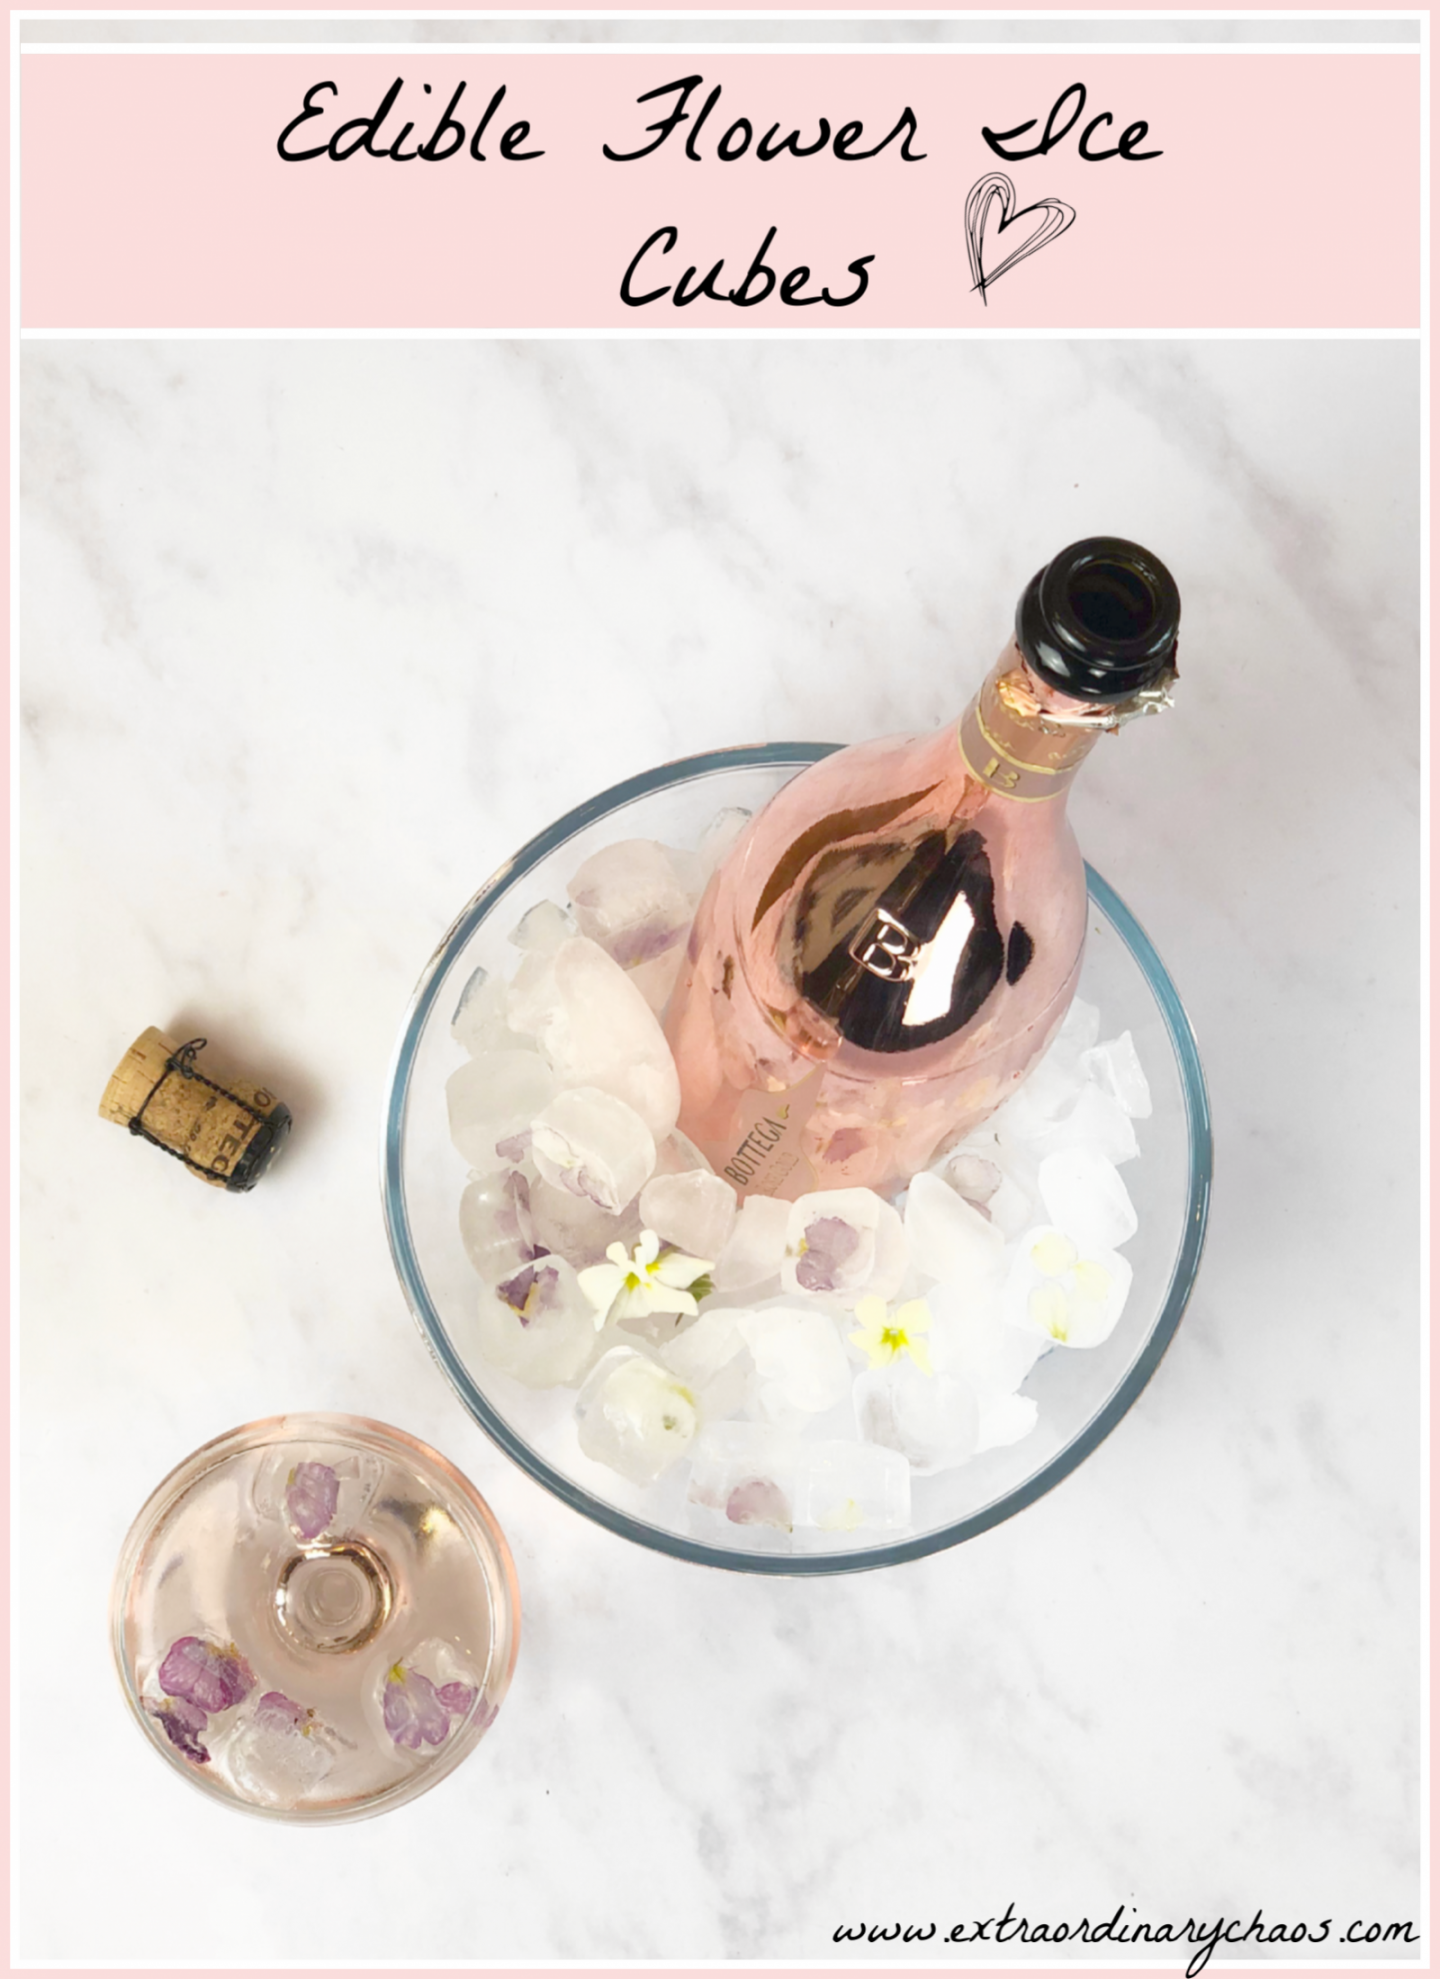 How to make edible flowe ice cubes for coktail parties and bridal showers